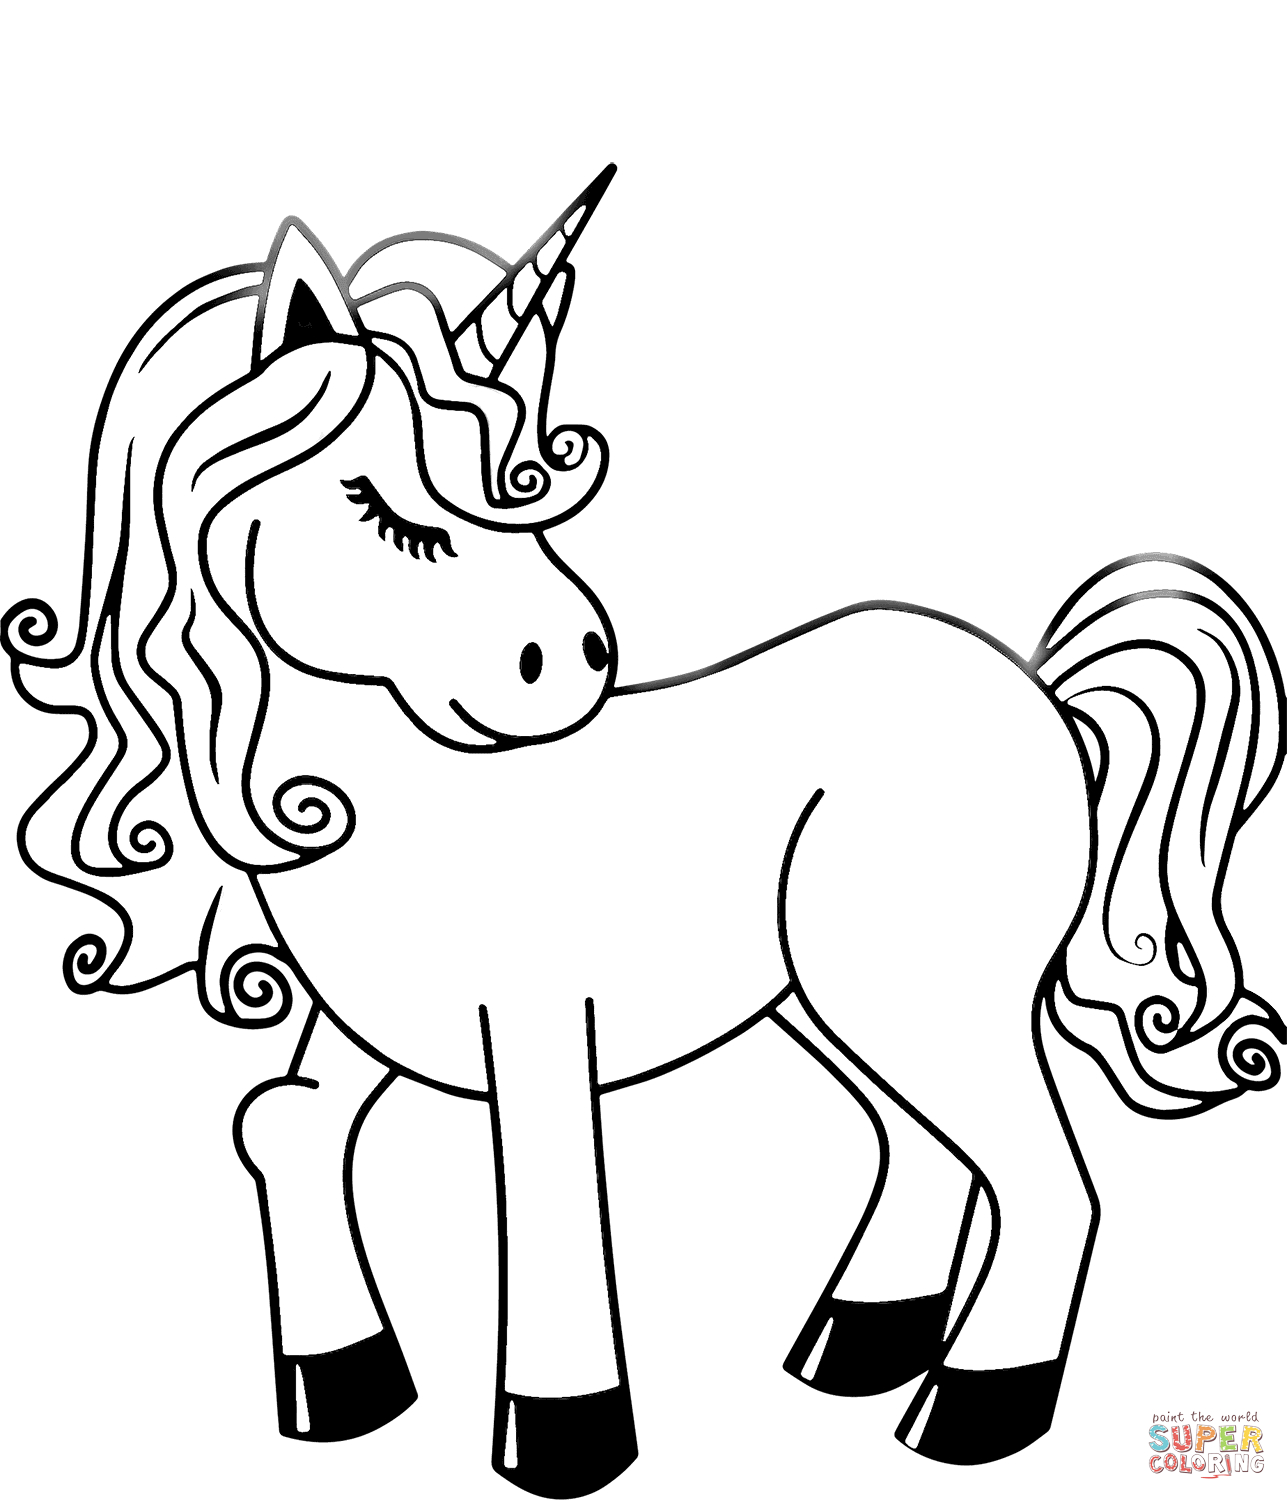 Unicorn Coloring Pages Online Unicorn Coloring Page Free Printable Coloring Pages